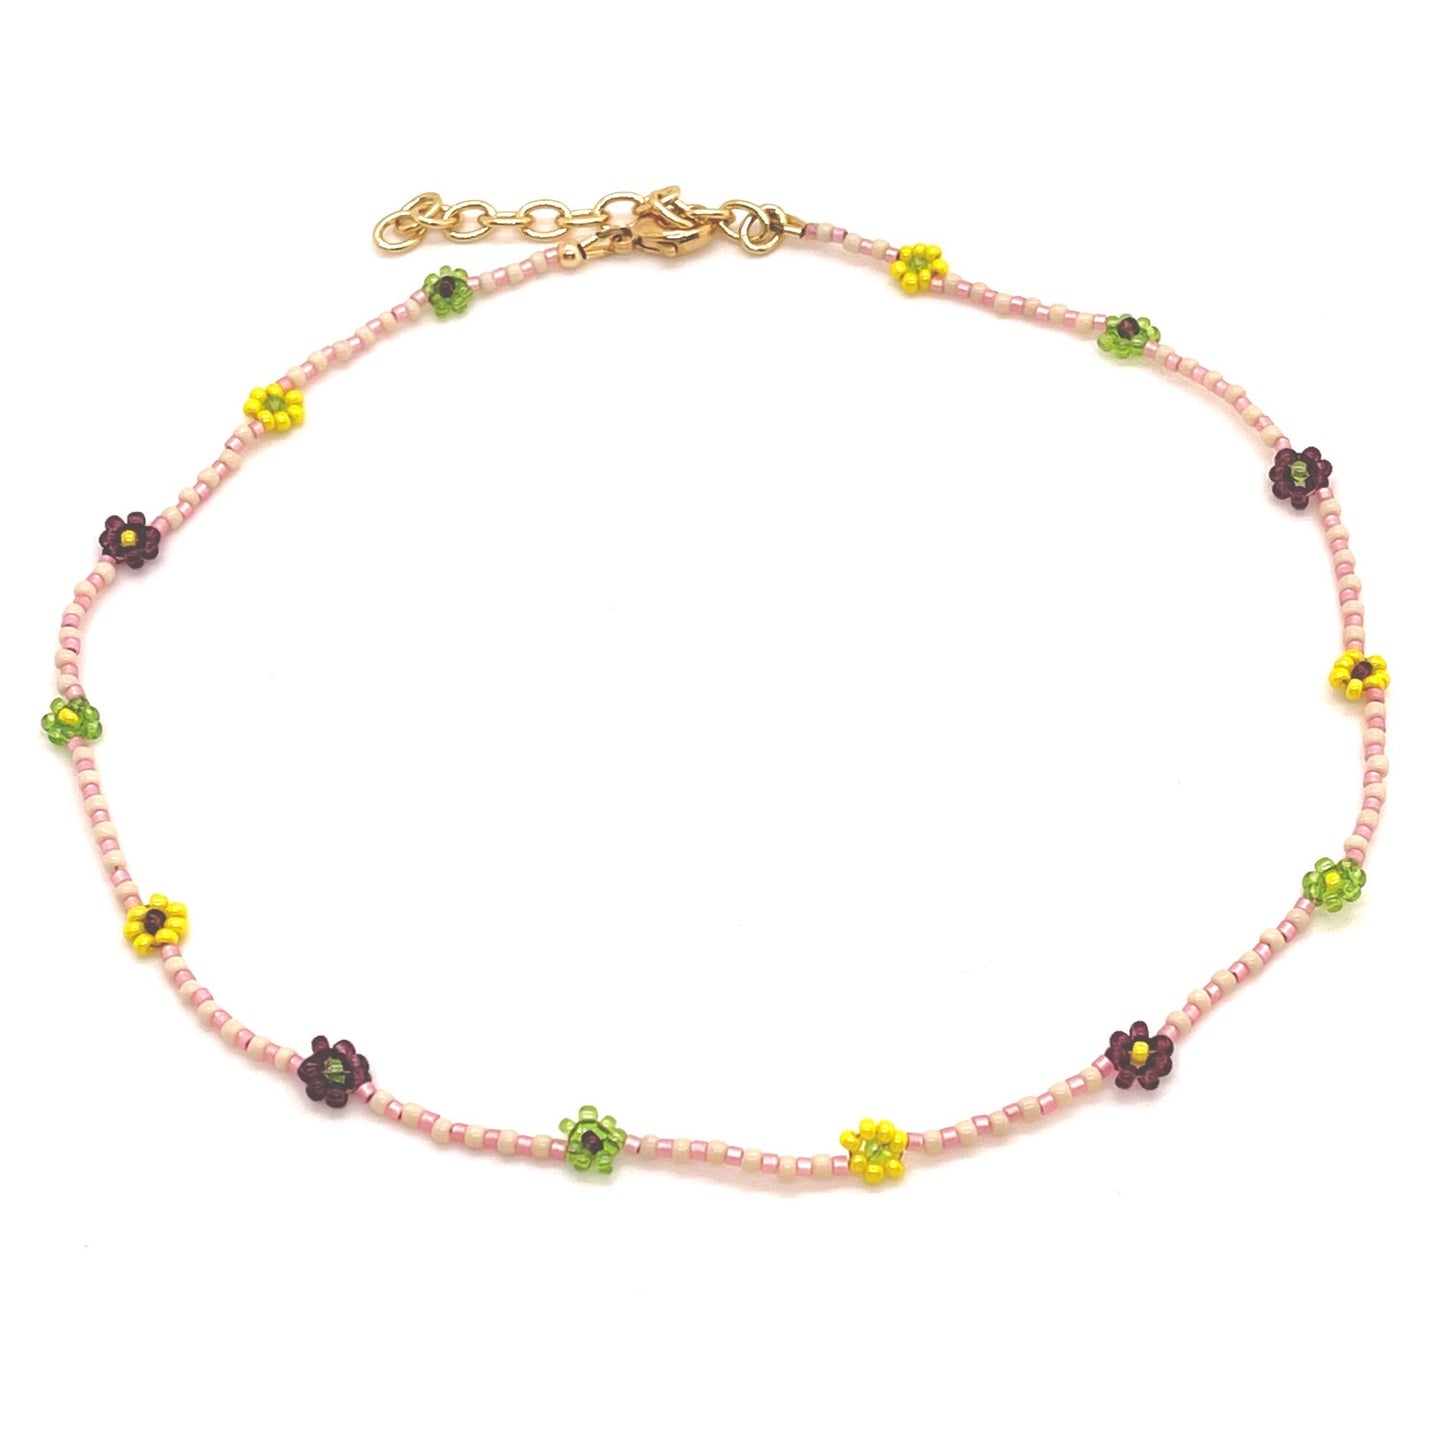 Pink beaded necklace with daisy chain flowers. Dainty pink and cream necklace with tiny plum, yellow, and green seed bead flowers.